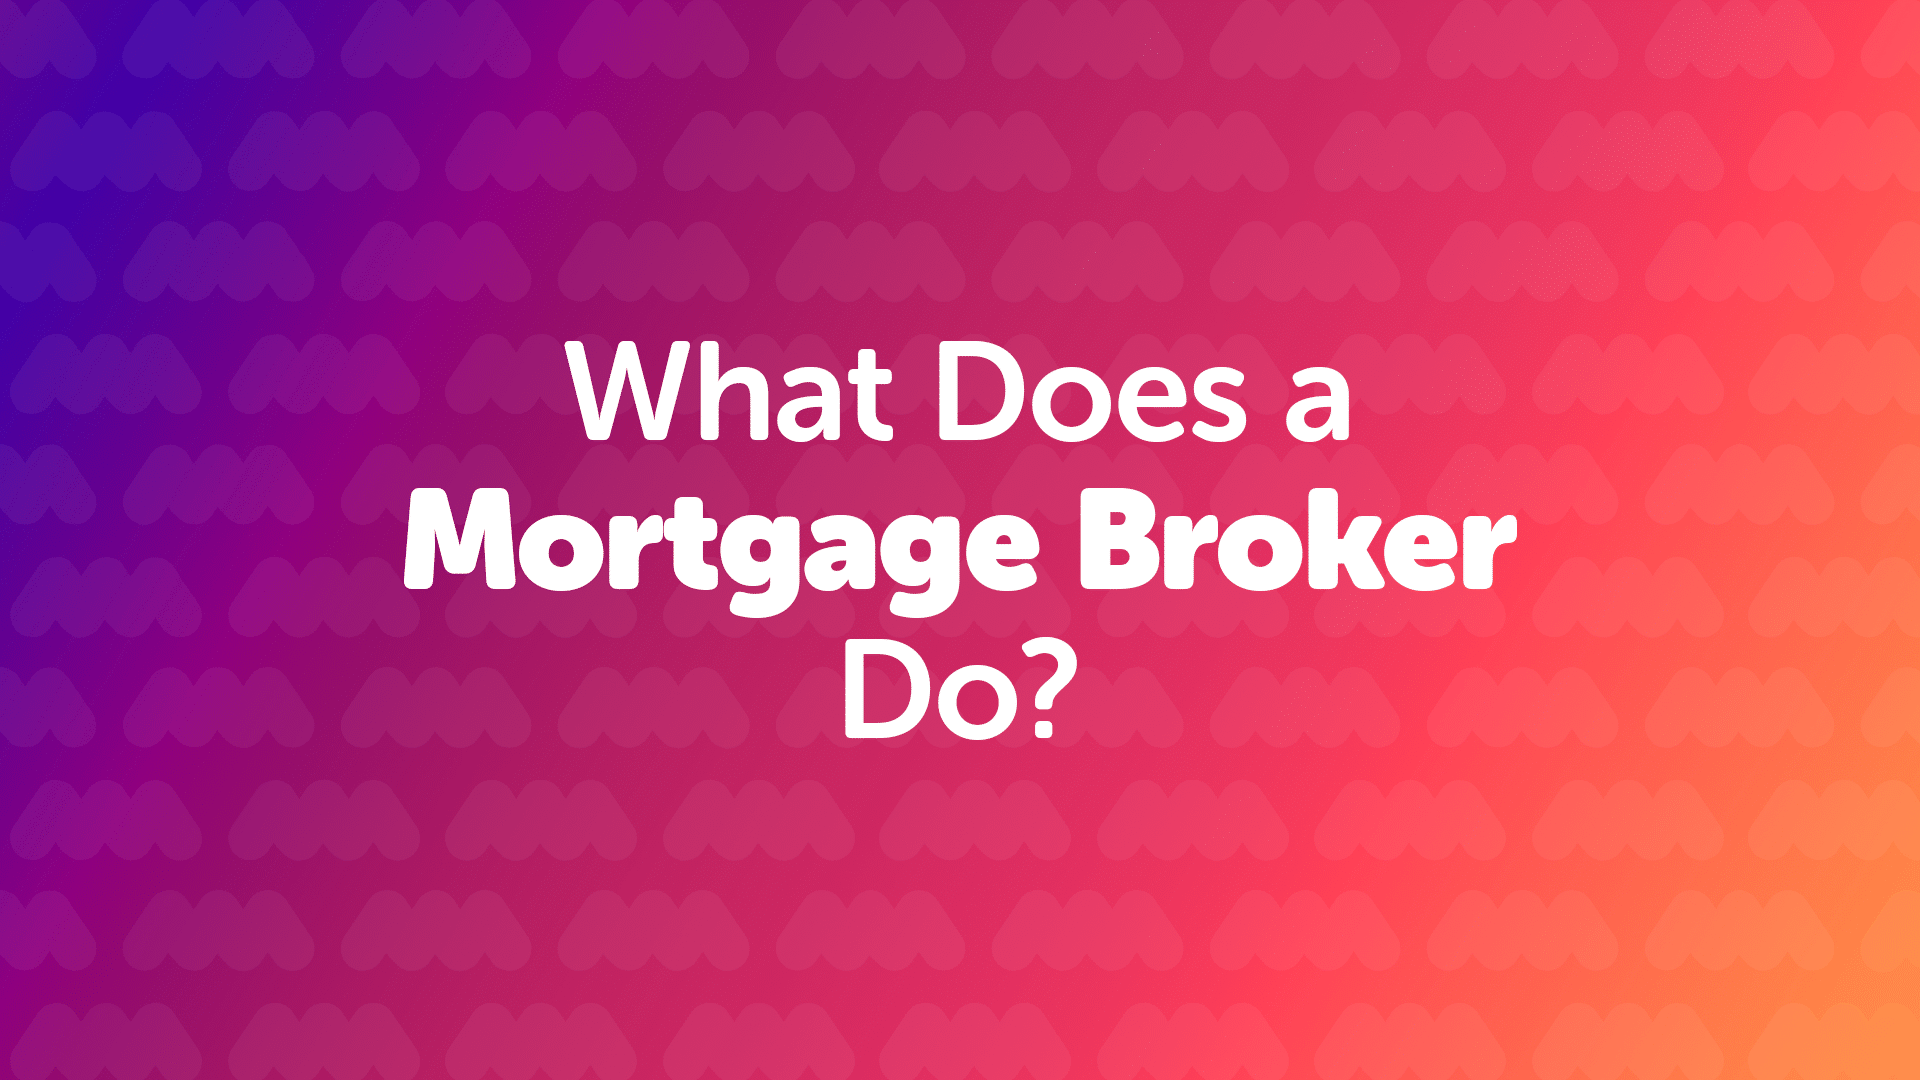 What Does a Mortgage Broker in Essex Do?